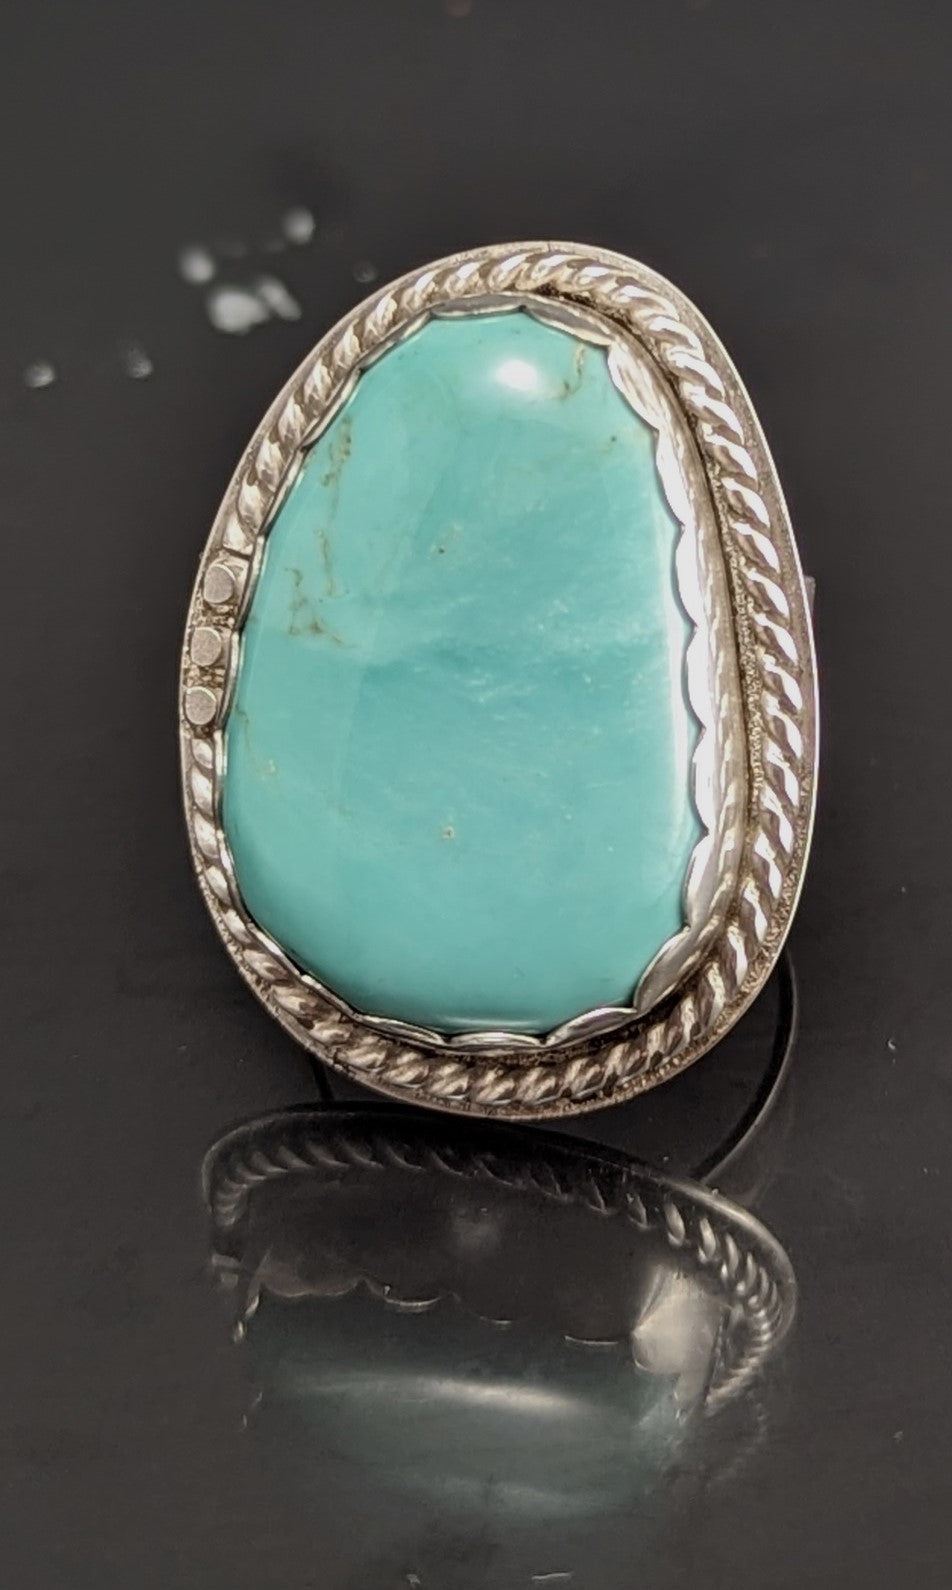 Turquoise Sterling Silver Ring- Nacozari size 8.5